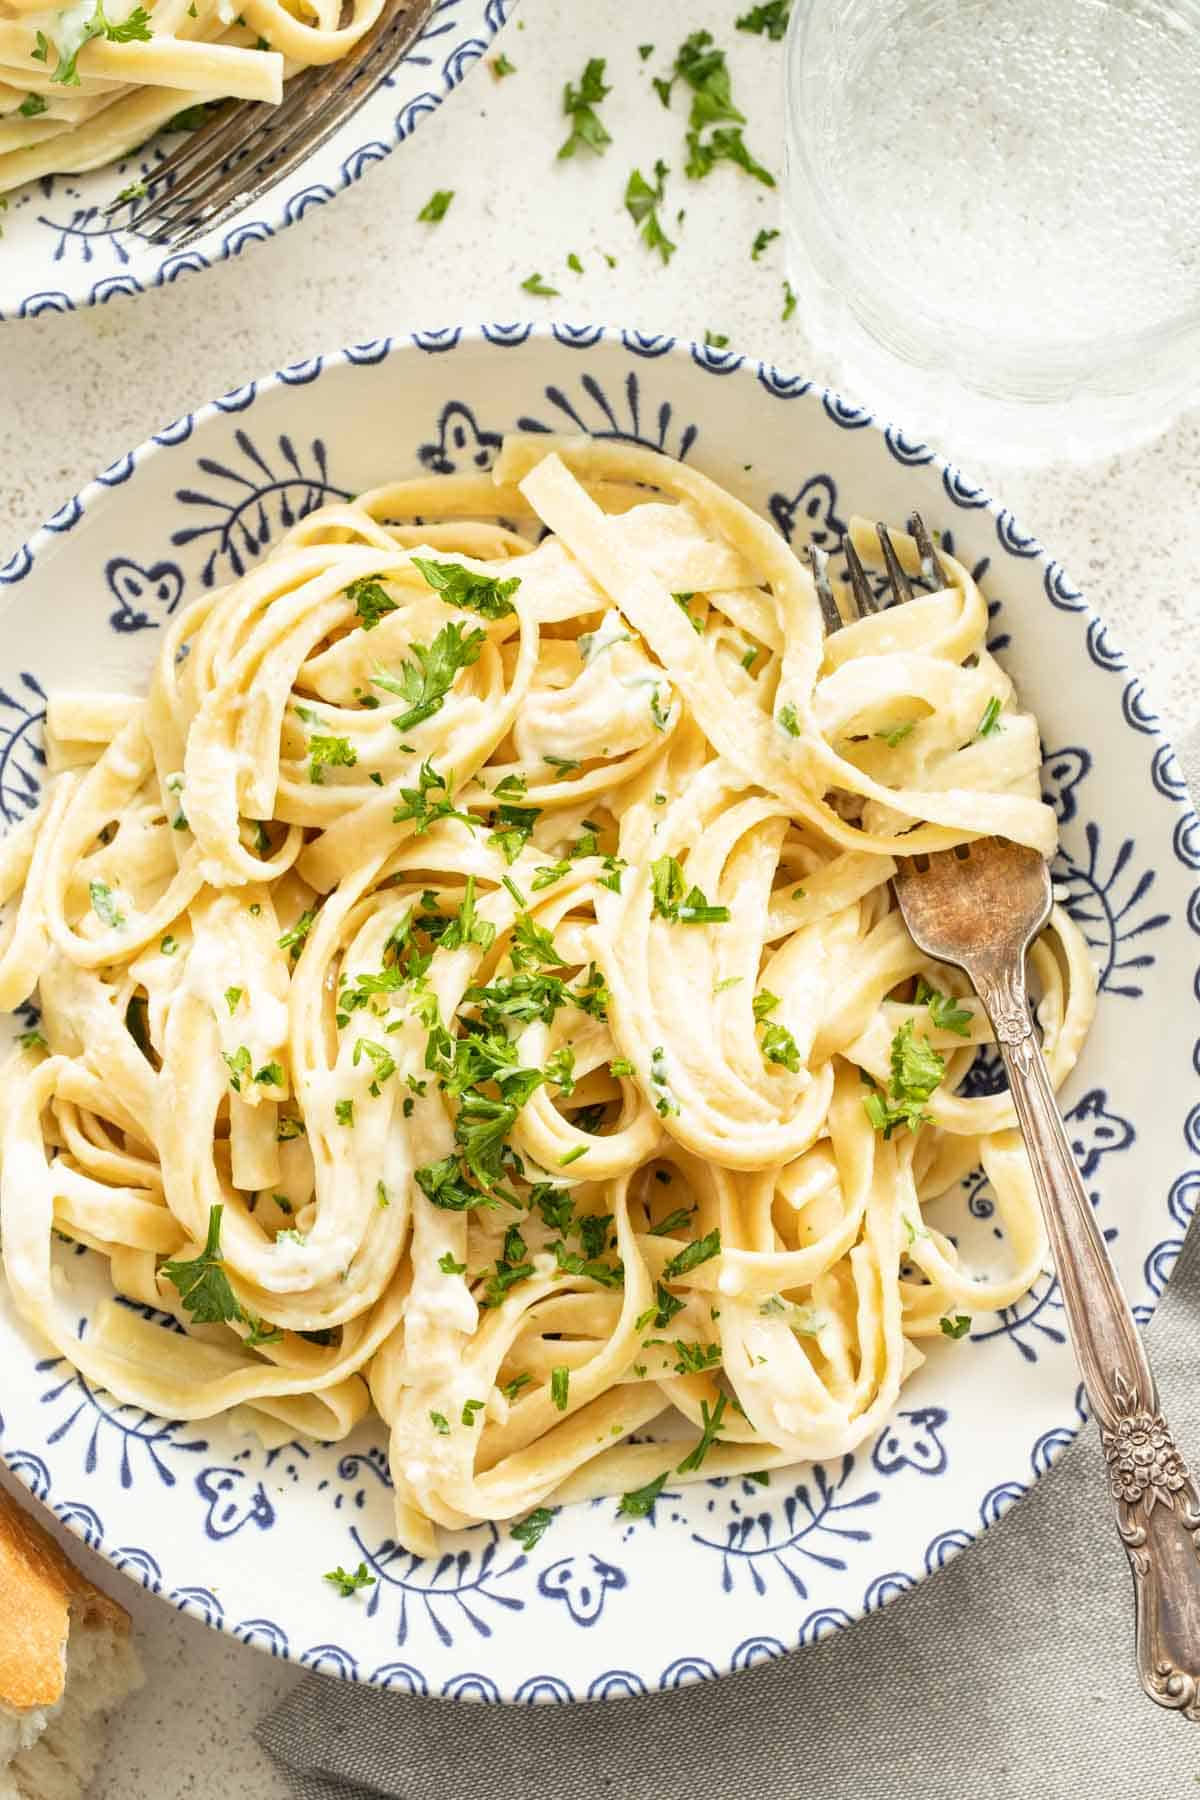 A bowl of creamy pasta topped with parsley and a fork.